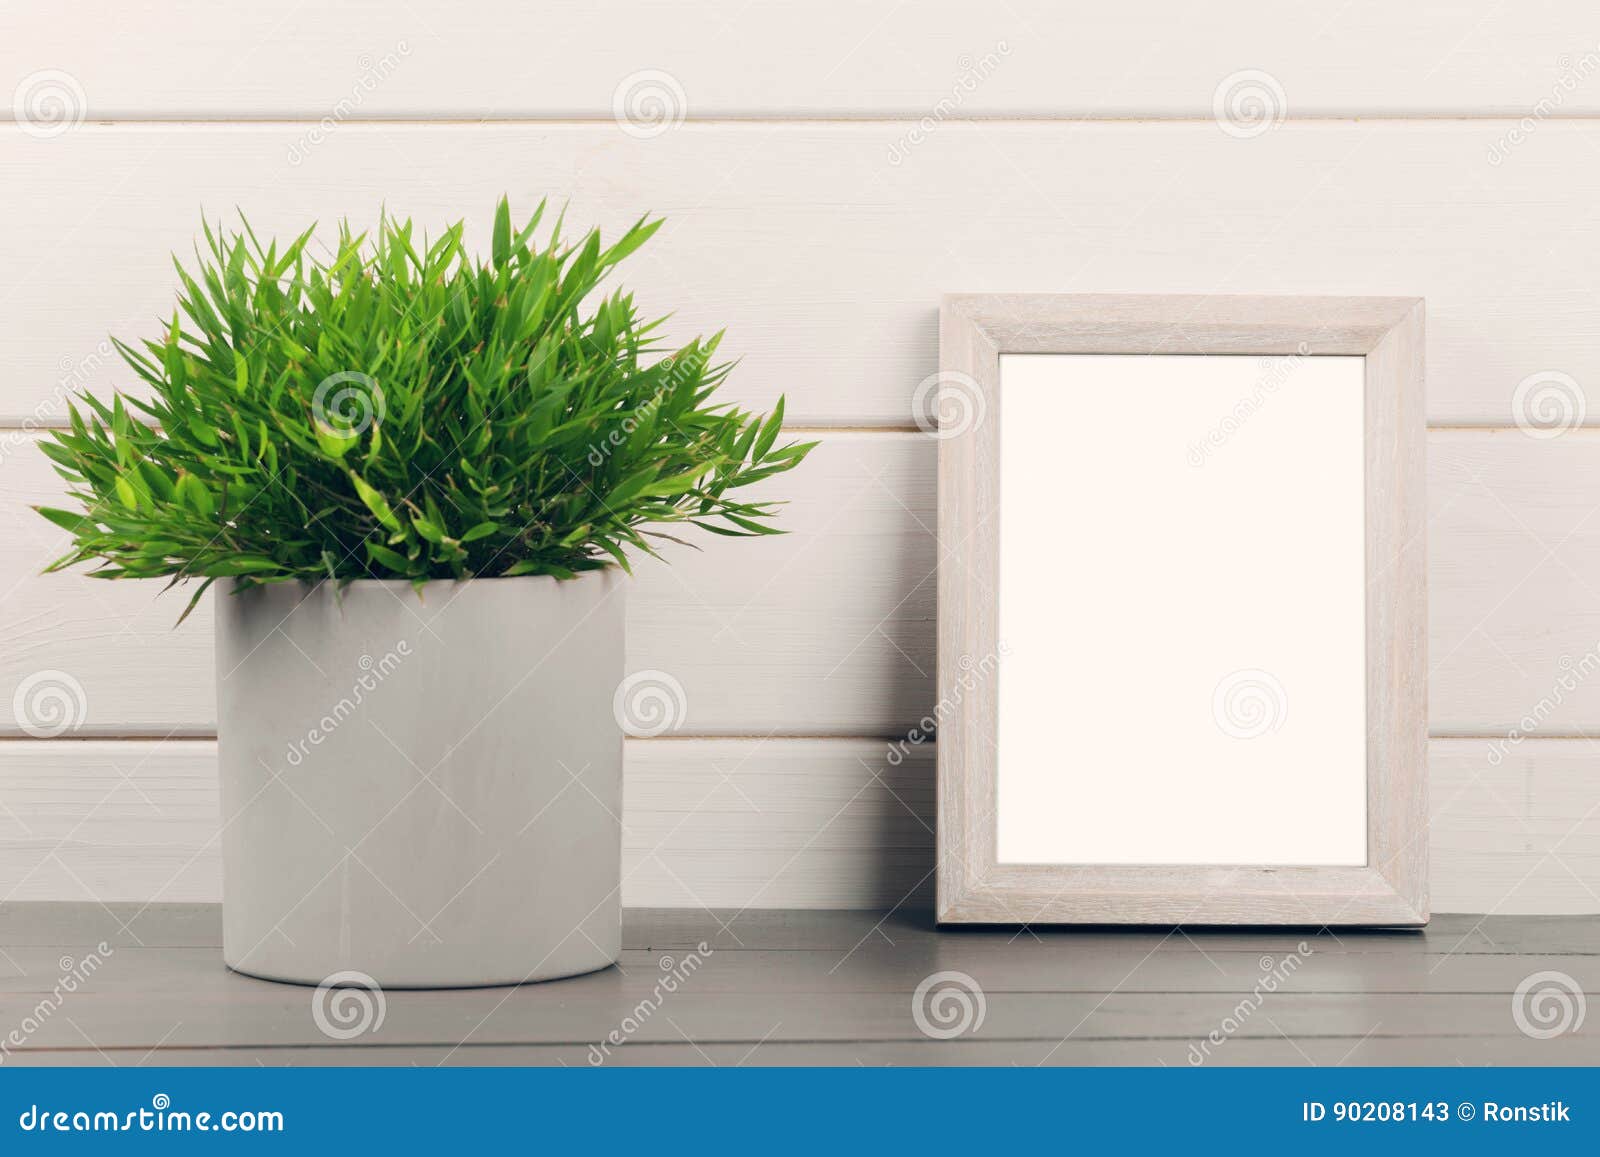 Home Decoration Blank Picture Frame And Flower Pot On Wooden T Stock Image Image of photo